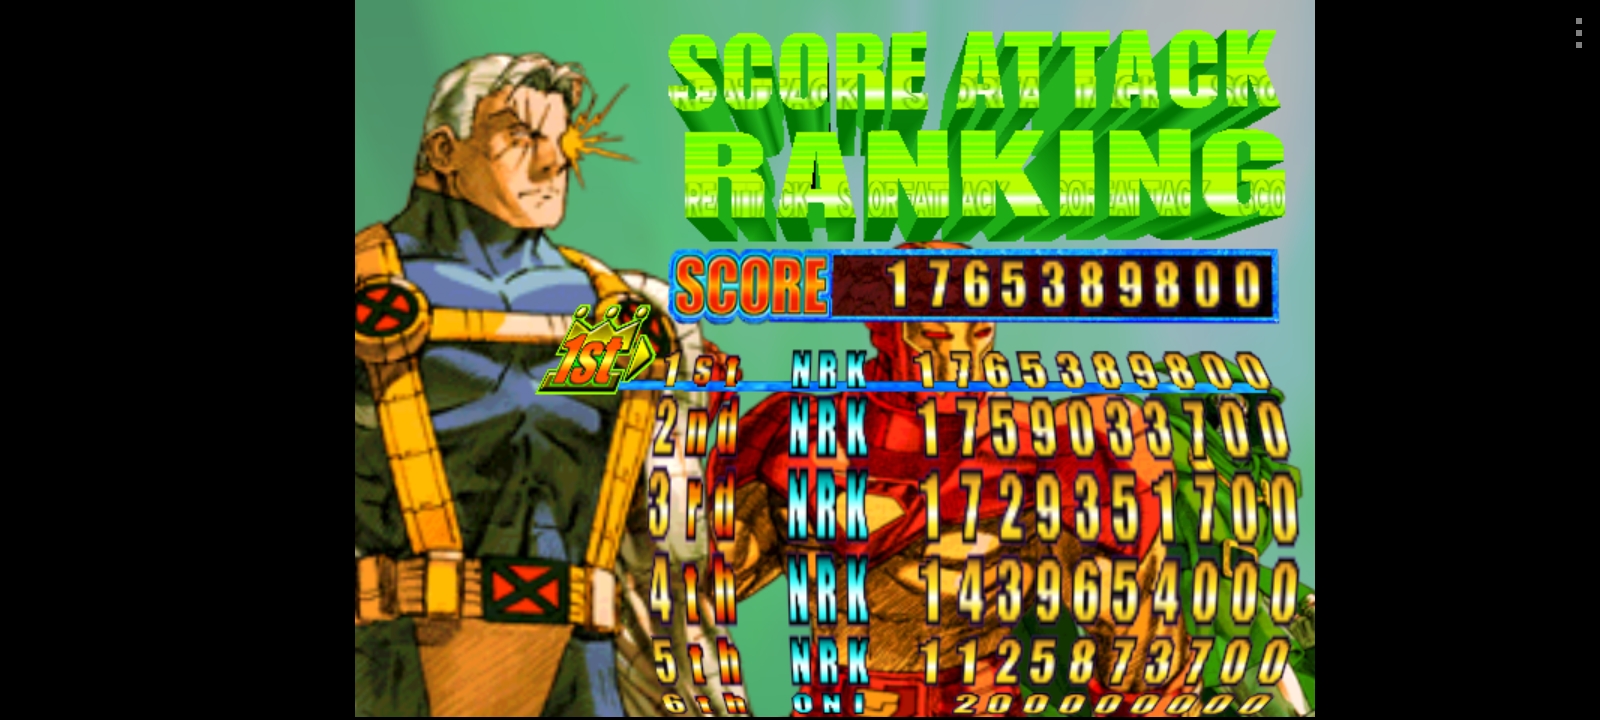 Hauntedprogram: Marvel vs. Capcom 2: New Age Of Heroes [Score Attack] (Dreamcast Emulated) 1,765,389,800 points on 2022-07-07 08:52:43